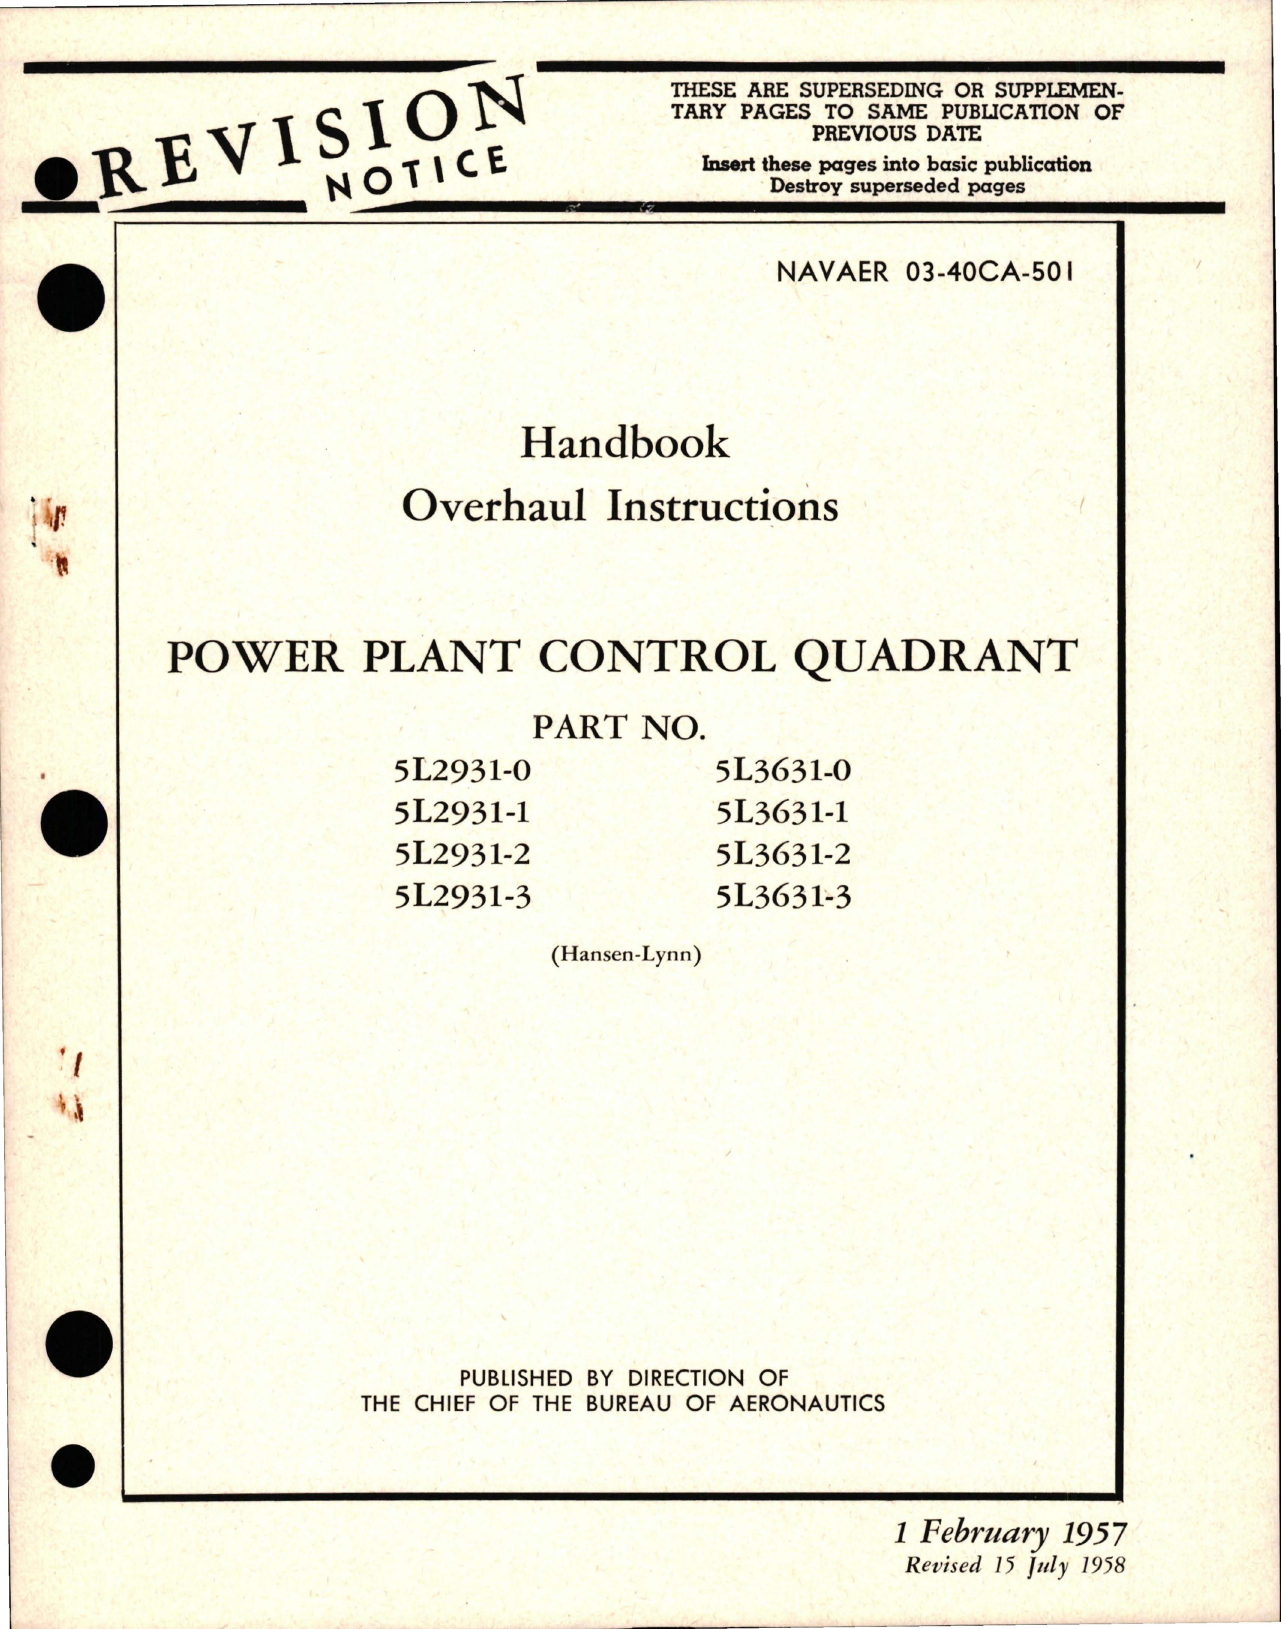 Sample page 1 from AirCorps Library document: Overhaul Instructions for Power Plant Control Quadrant - Parts 5L2931-0, 5L2931-1, 5L2931-2, 5L2931-3, 5L3631-0, 5L3631-1, 5L3631-2, and 5L3631-3